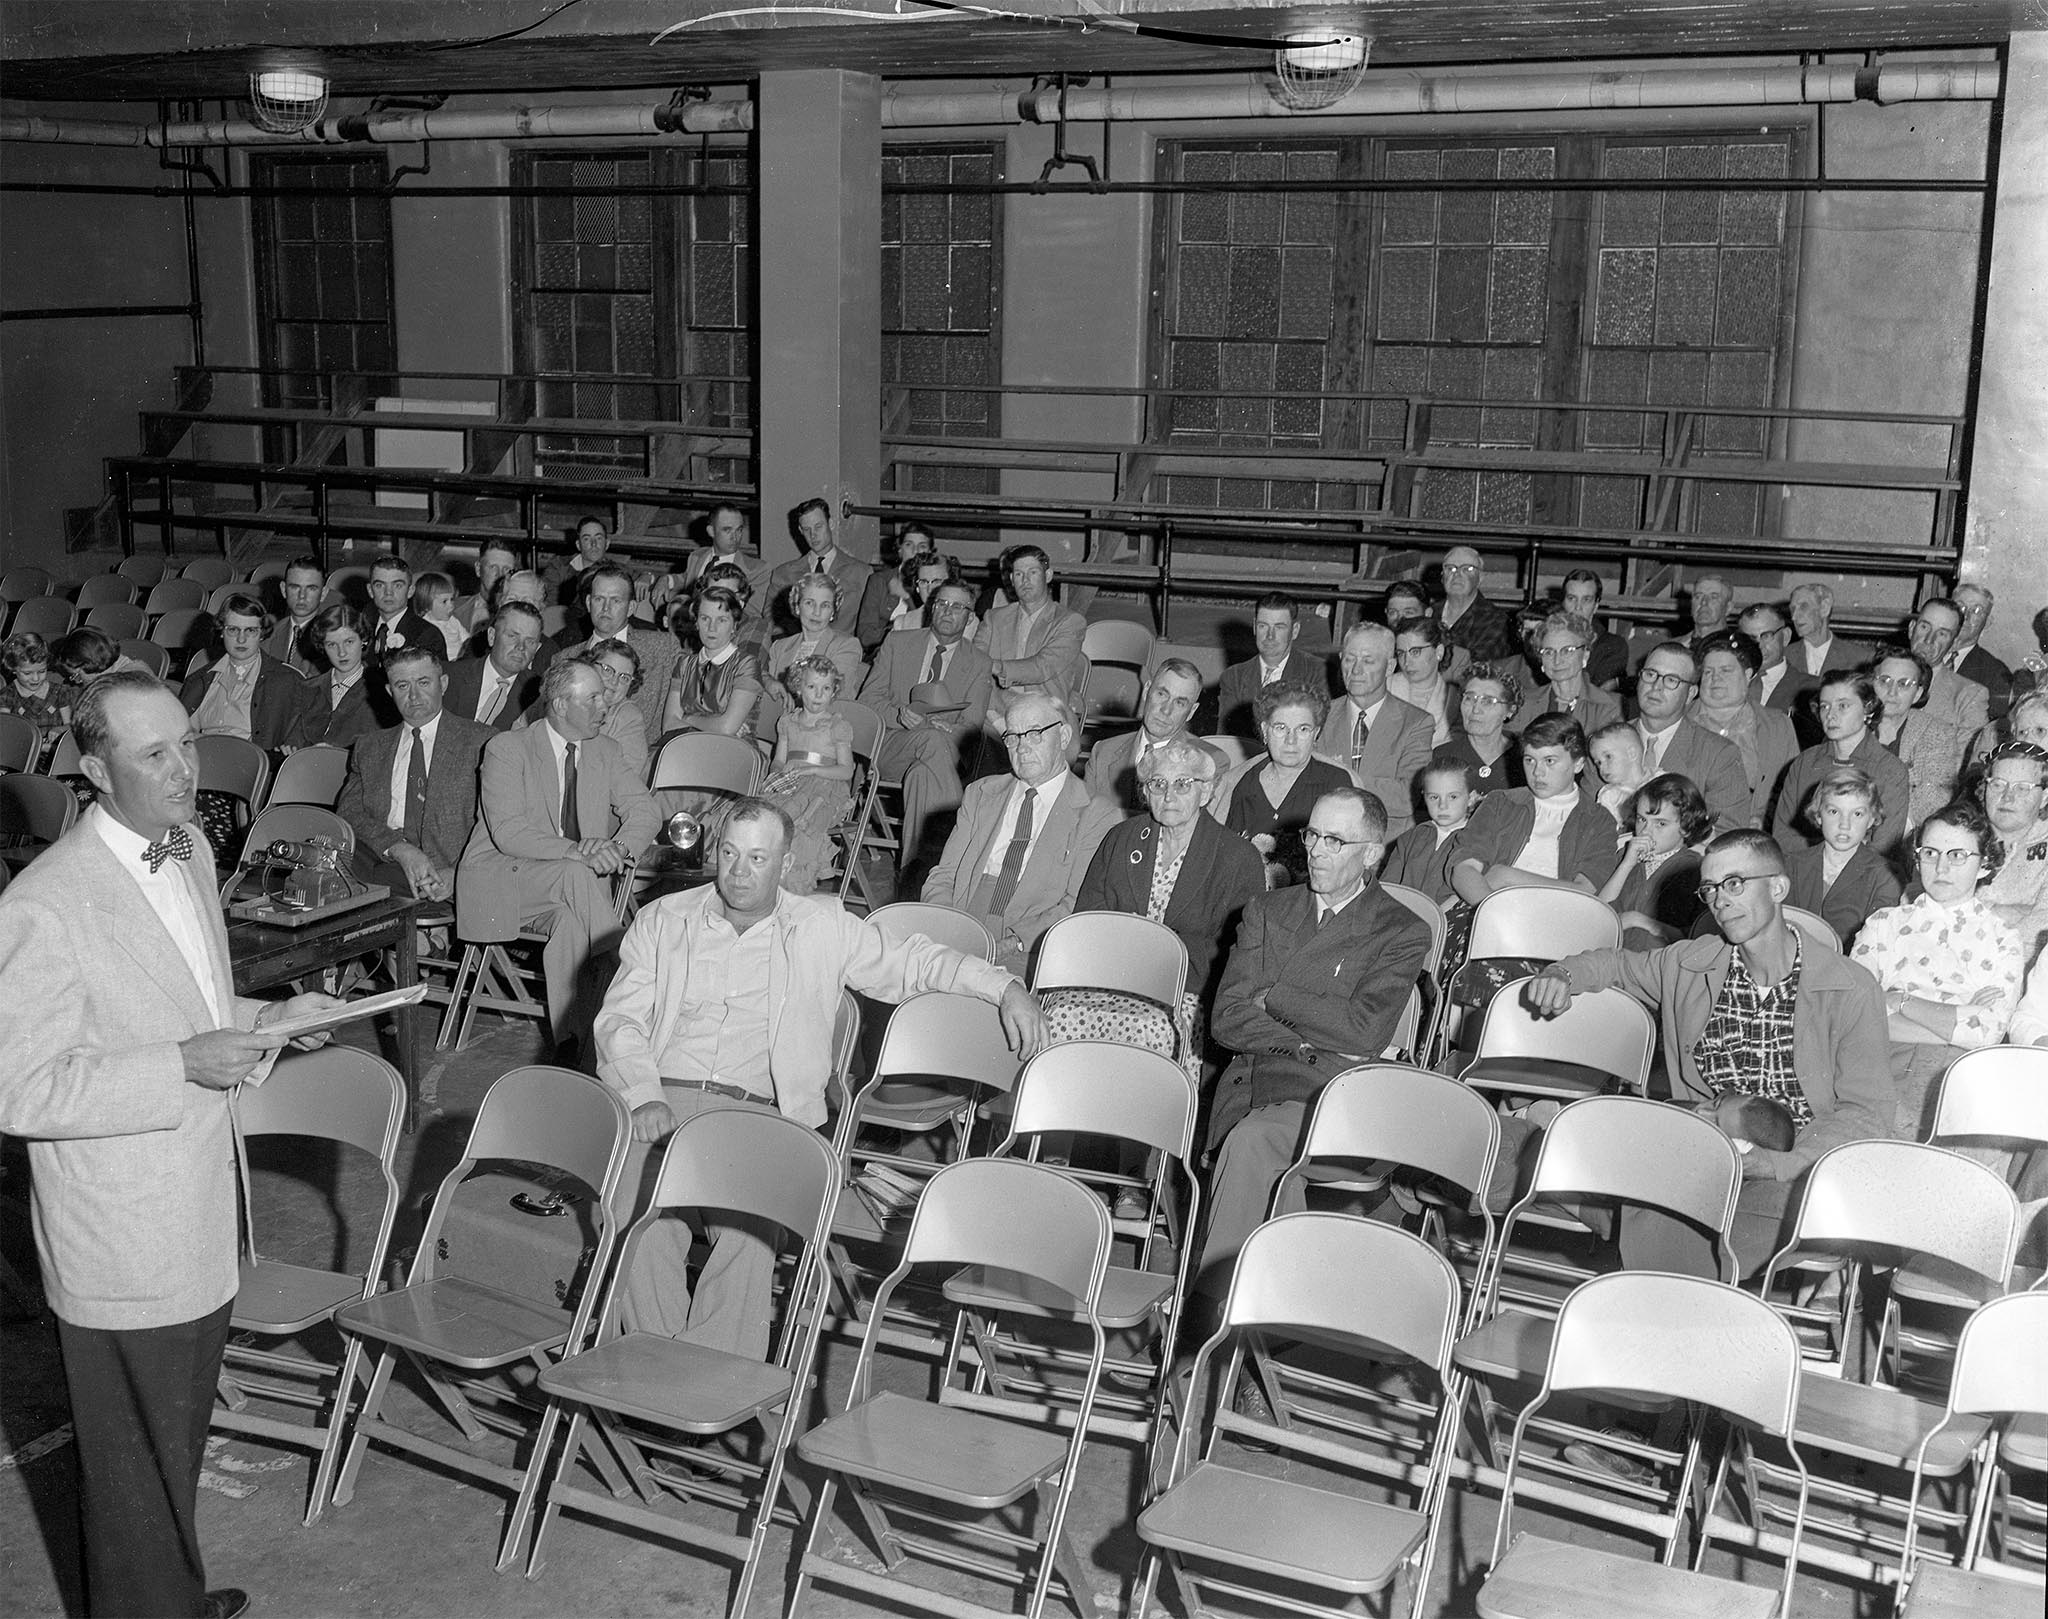 Doyle Johnson, chairman of the Alfalfa County Farm Bureau resolutions committee, presents proposed resolutions to his fellow county members at their annual meeting in October 1955.